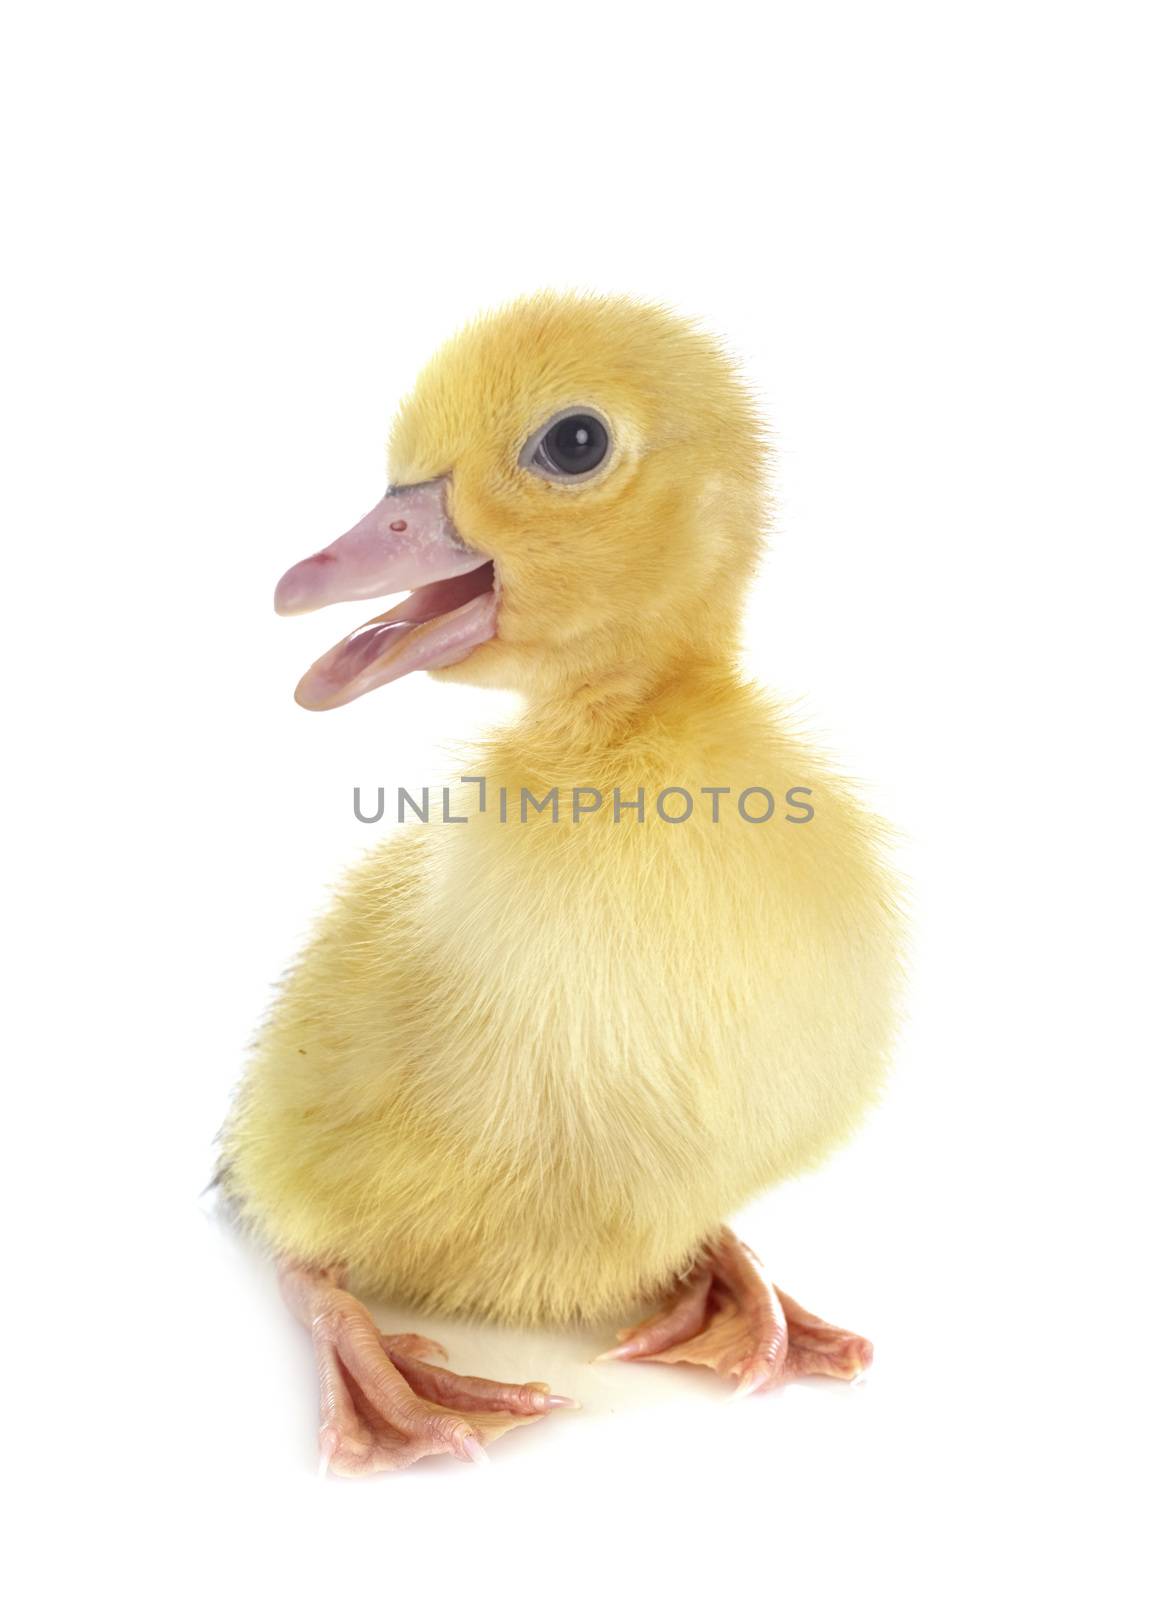 young duckling in front of white background